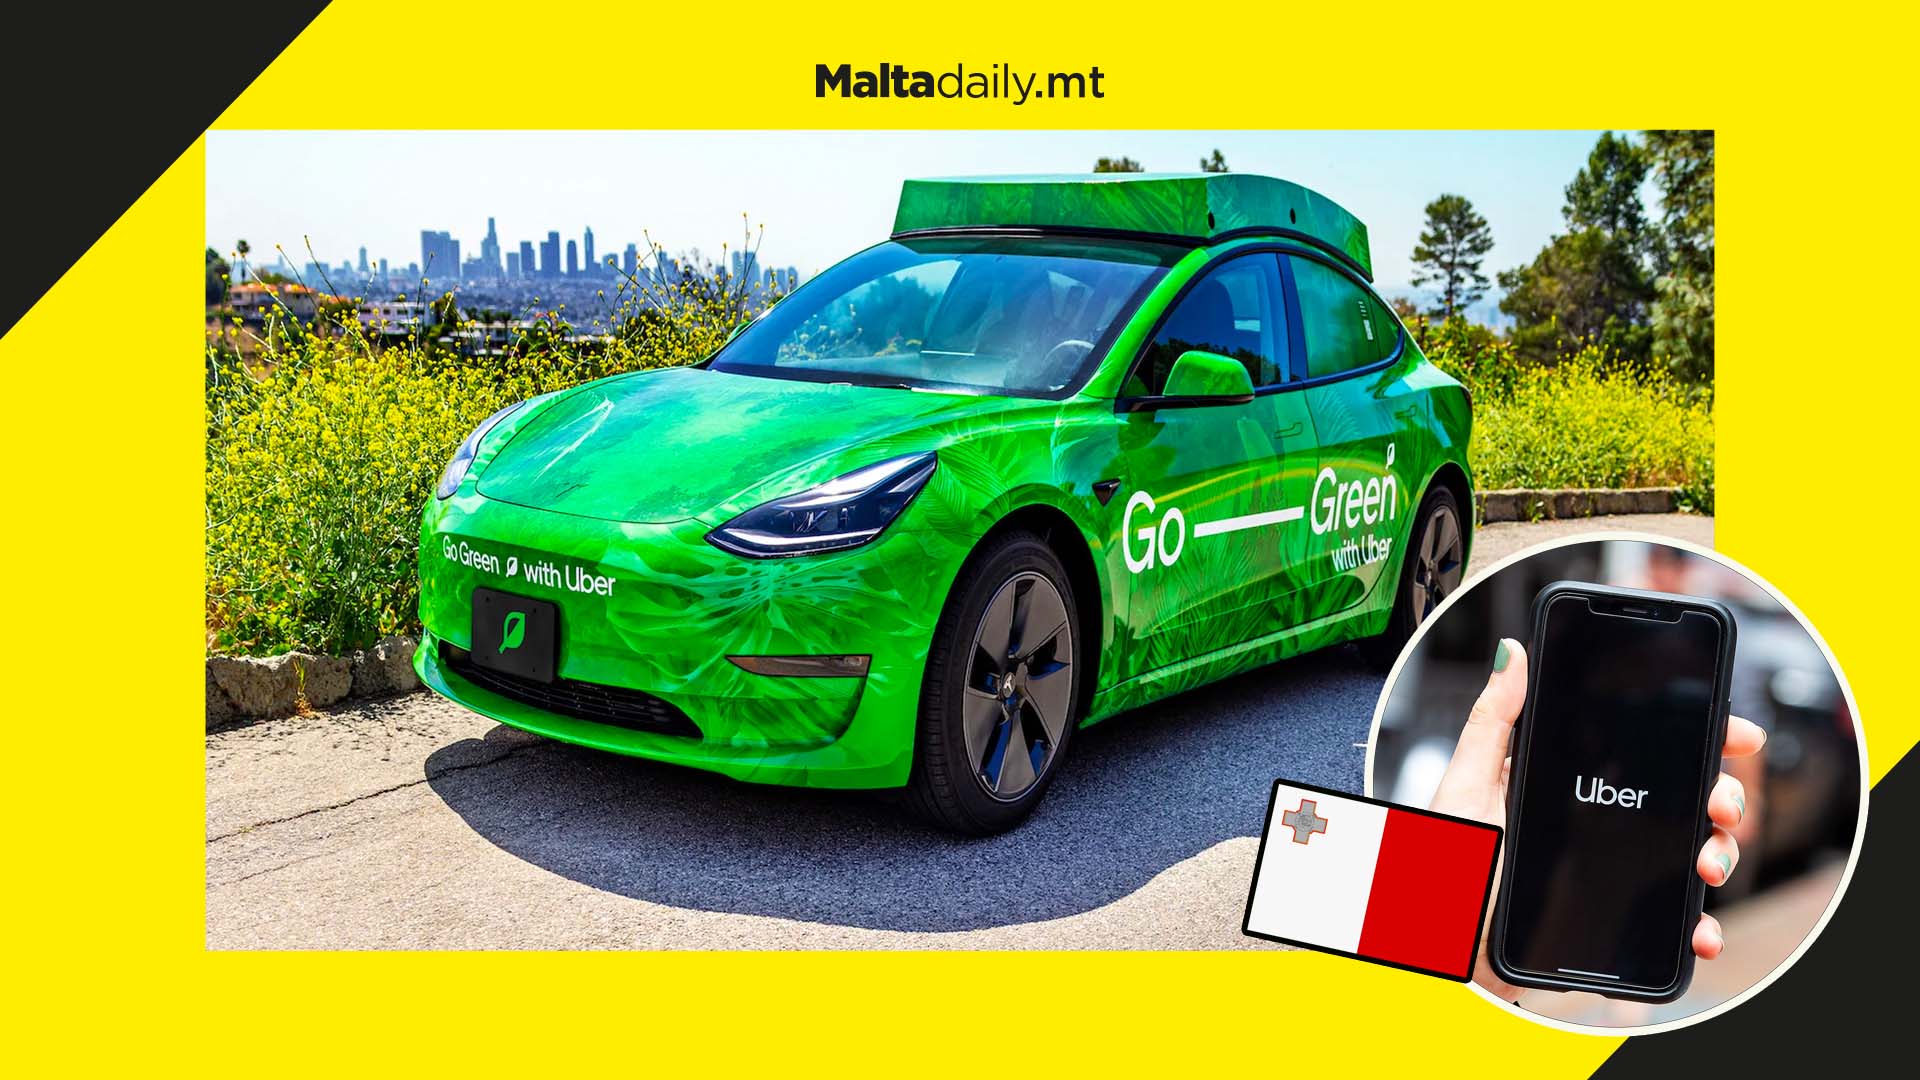 Uber Green arrives in Malta to promote zero emission mobility